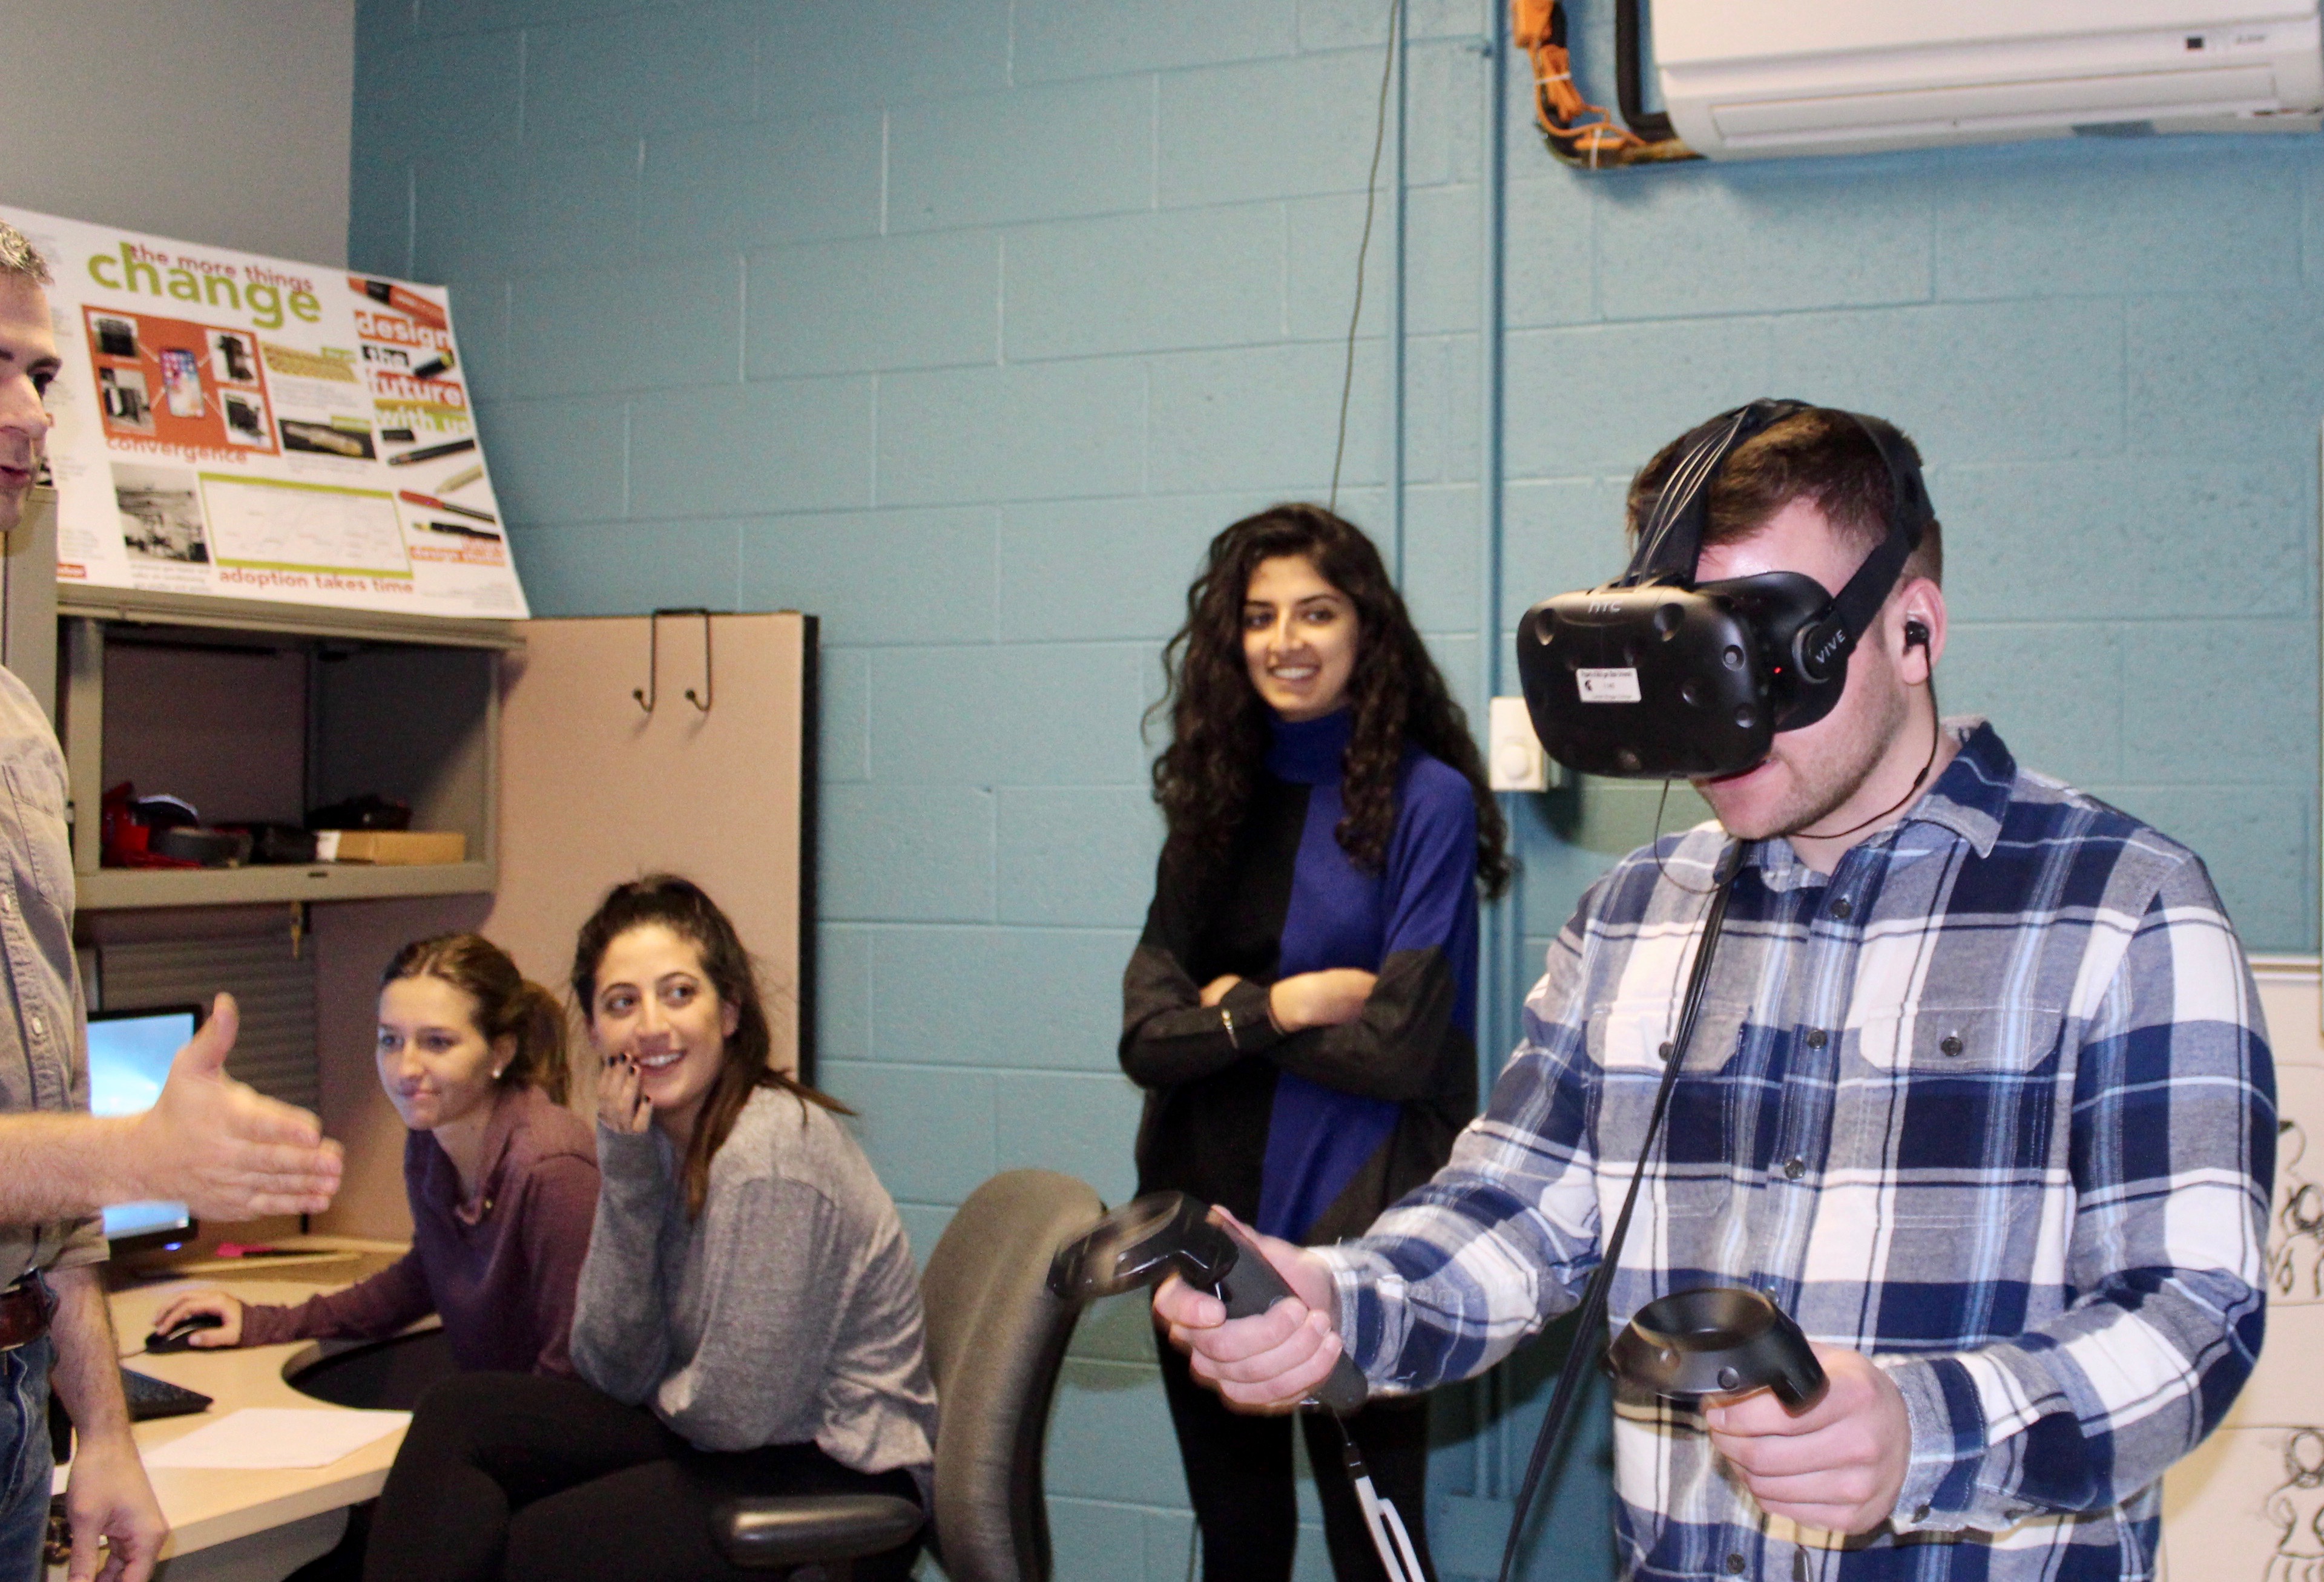 a student explores a virtual realm as other students look on. Photo credit: Piper Cook, LBC